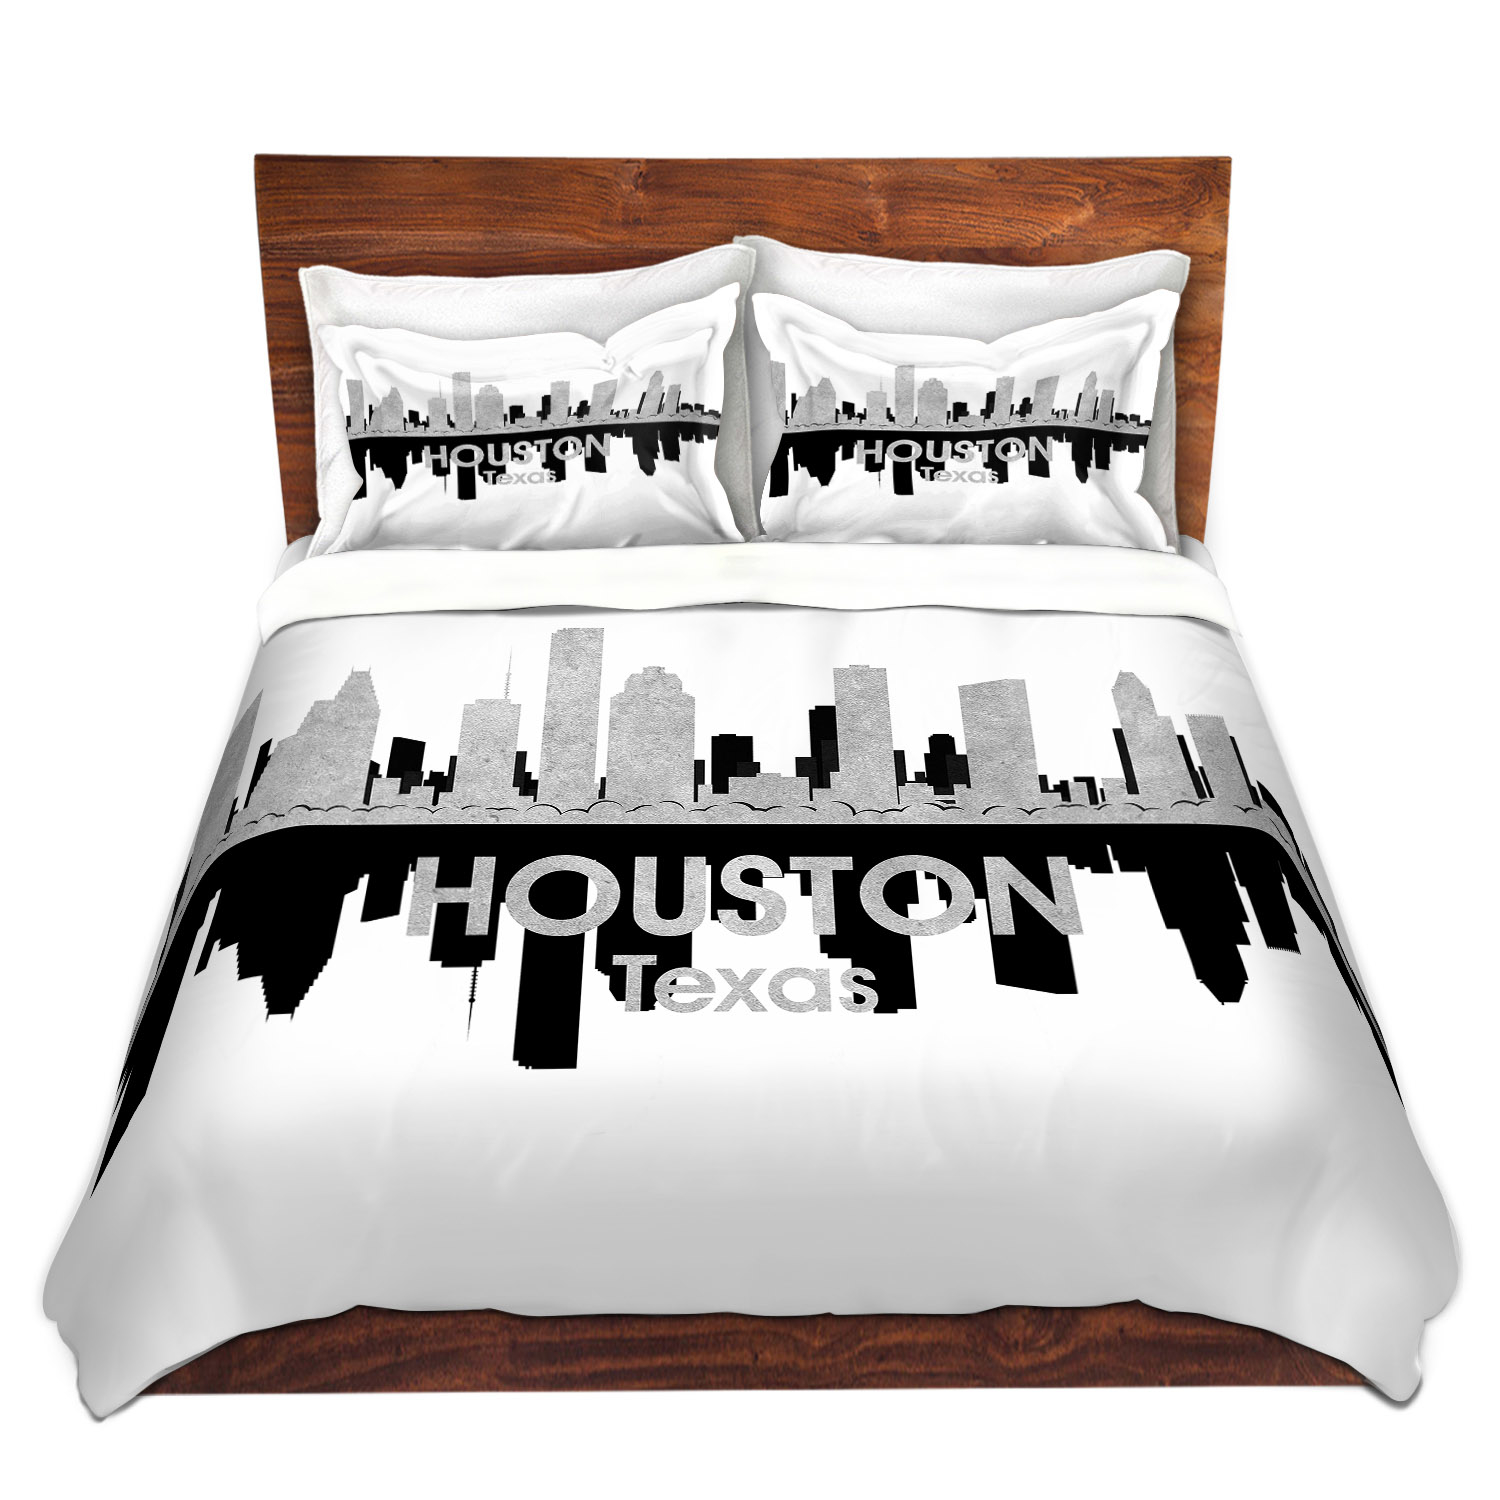 Dianoche Microfiber Duvet Covers By Angelina Vick - City Iv Houston Texas